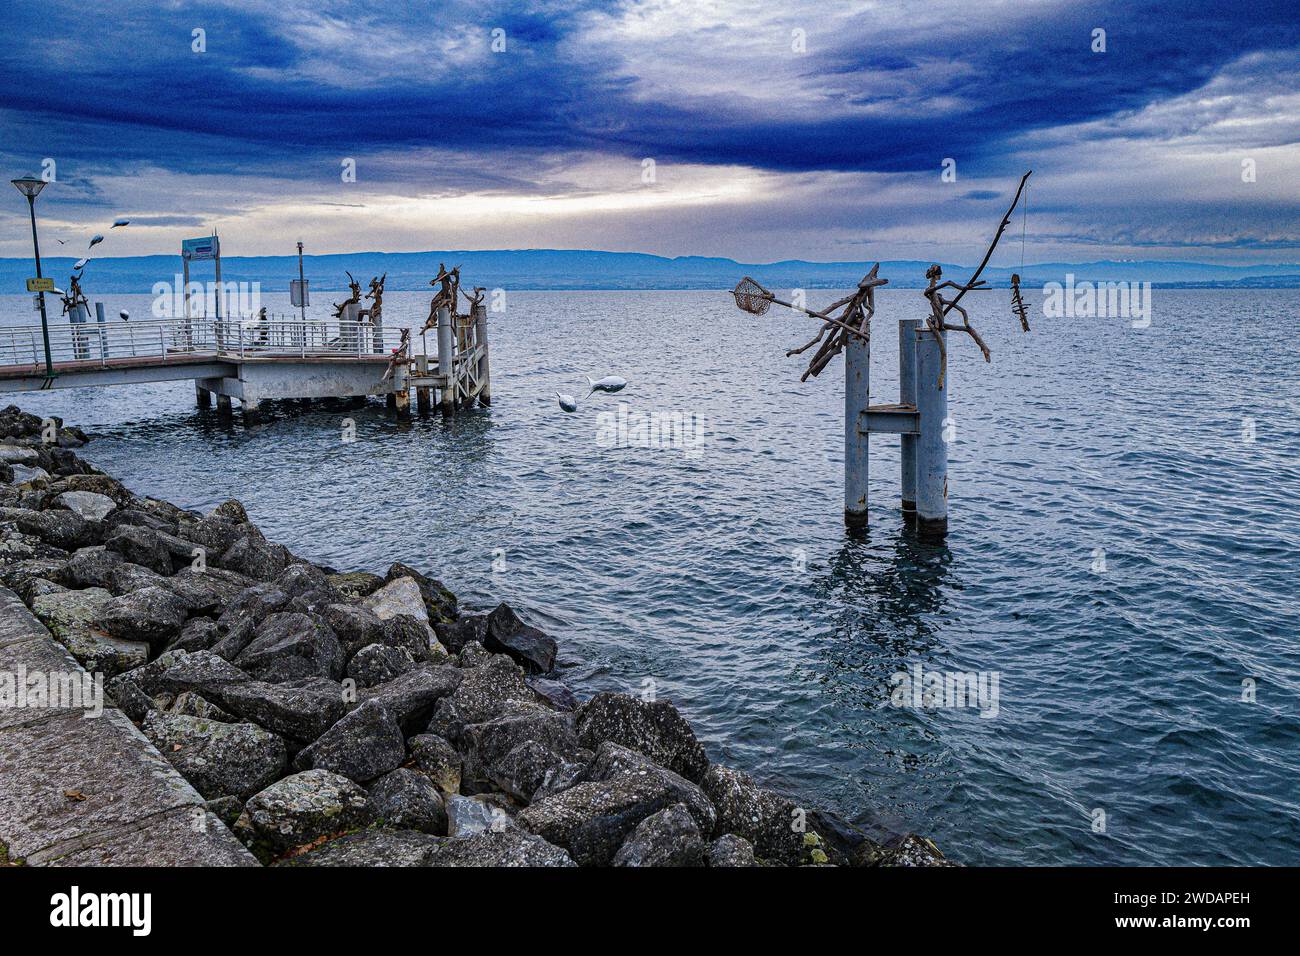 Several metallic birds perched on poles in the water along a pier Stock Photo